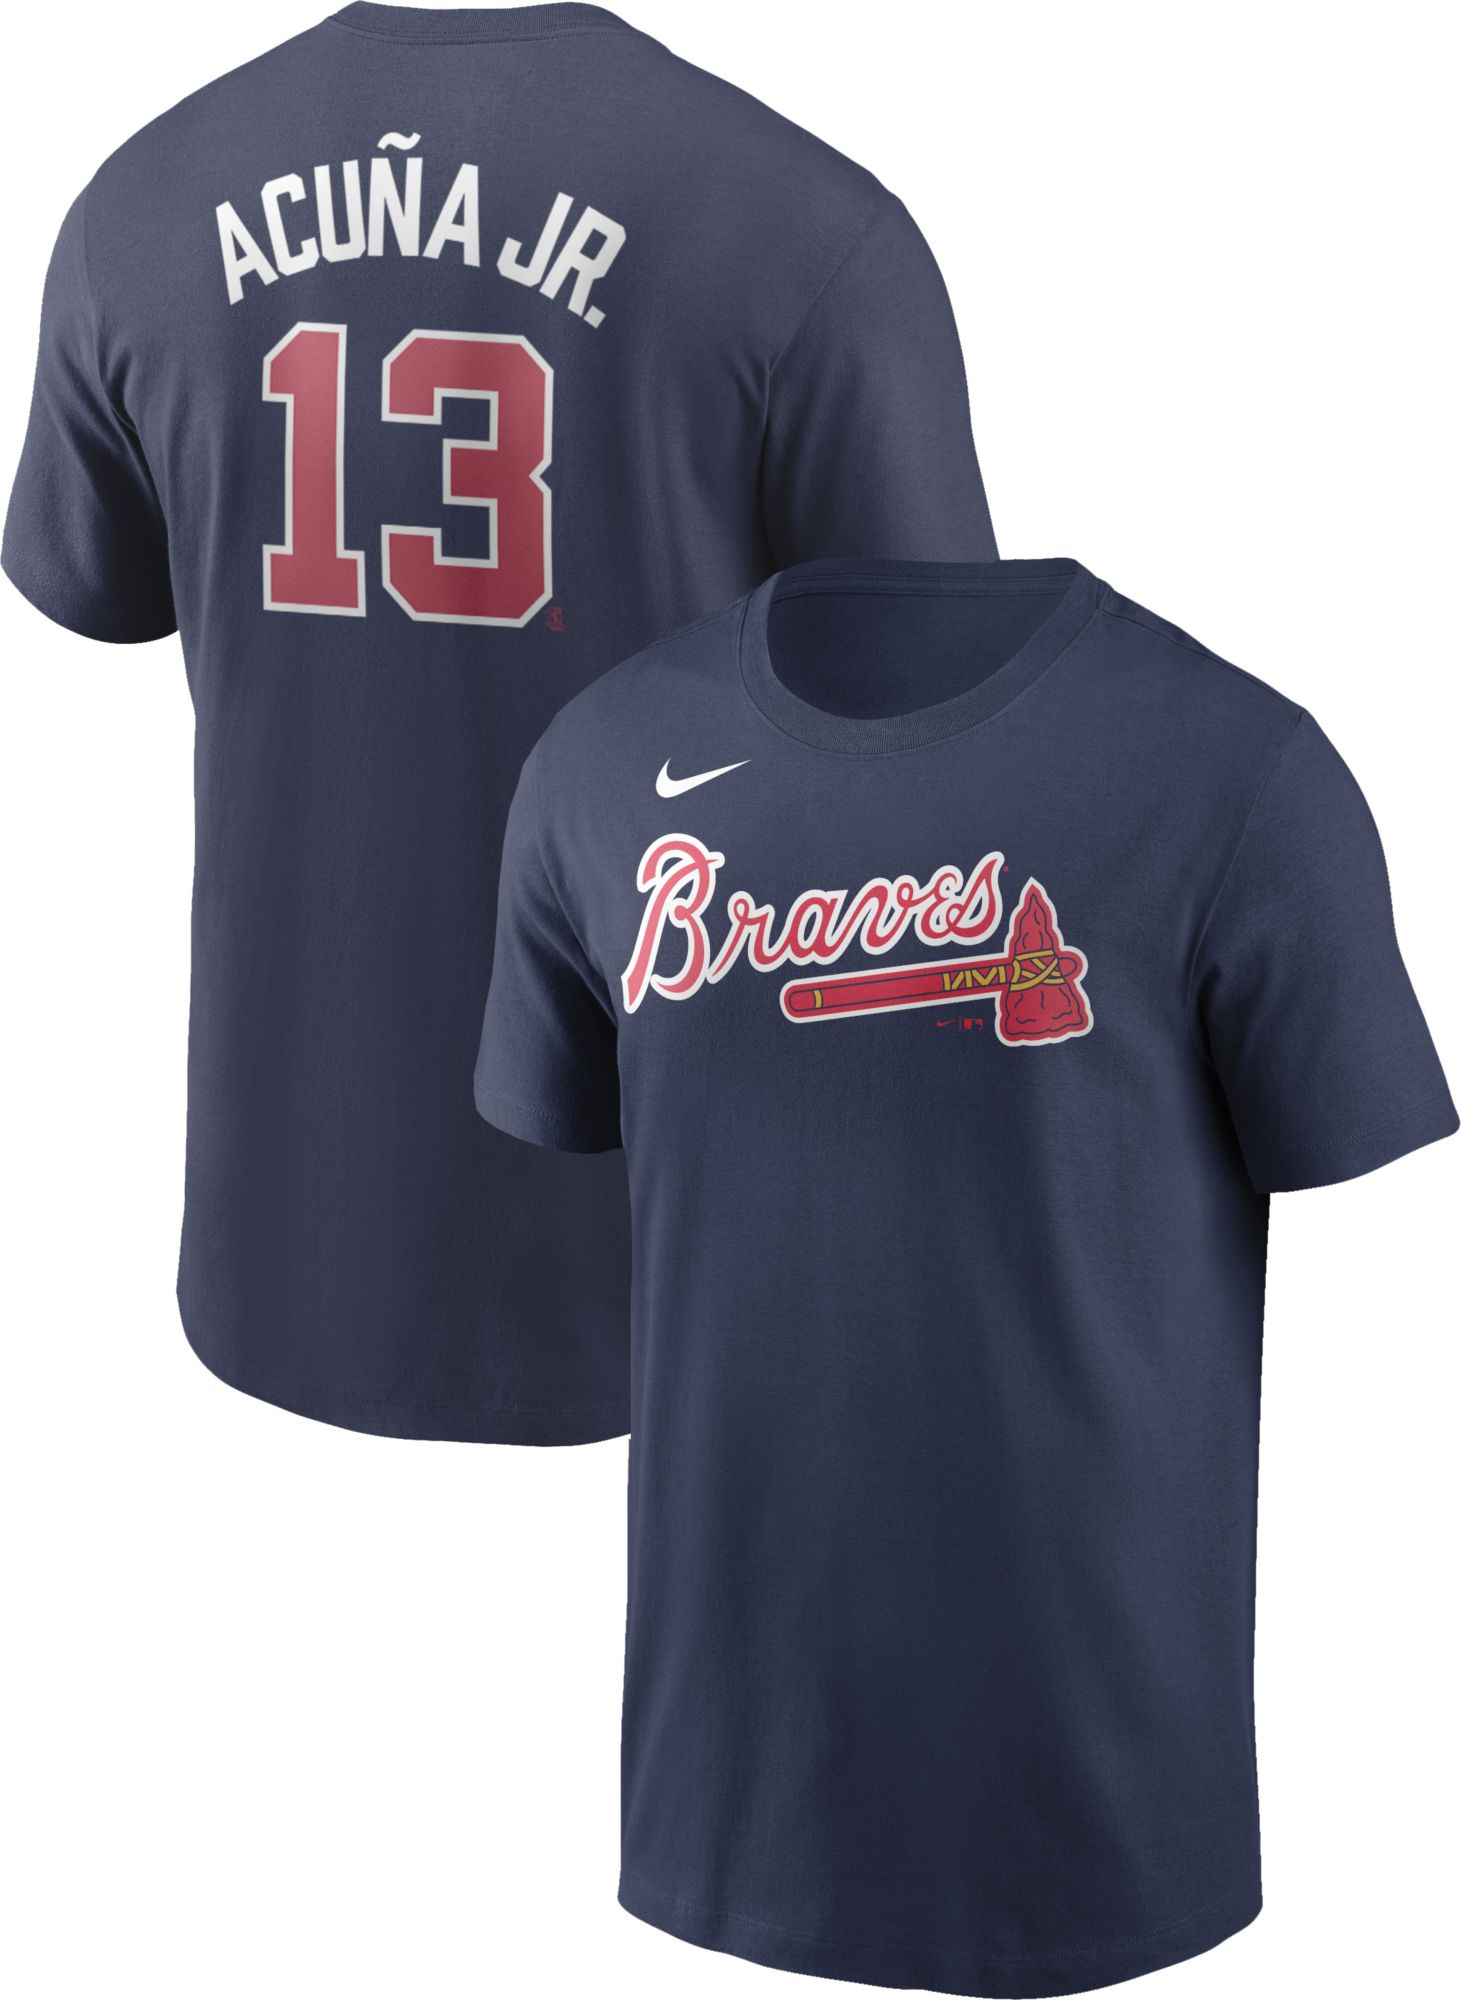 Nike MLB Atlanta Braves Official Replica Jersey City Connect Blue